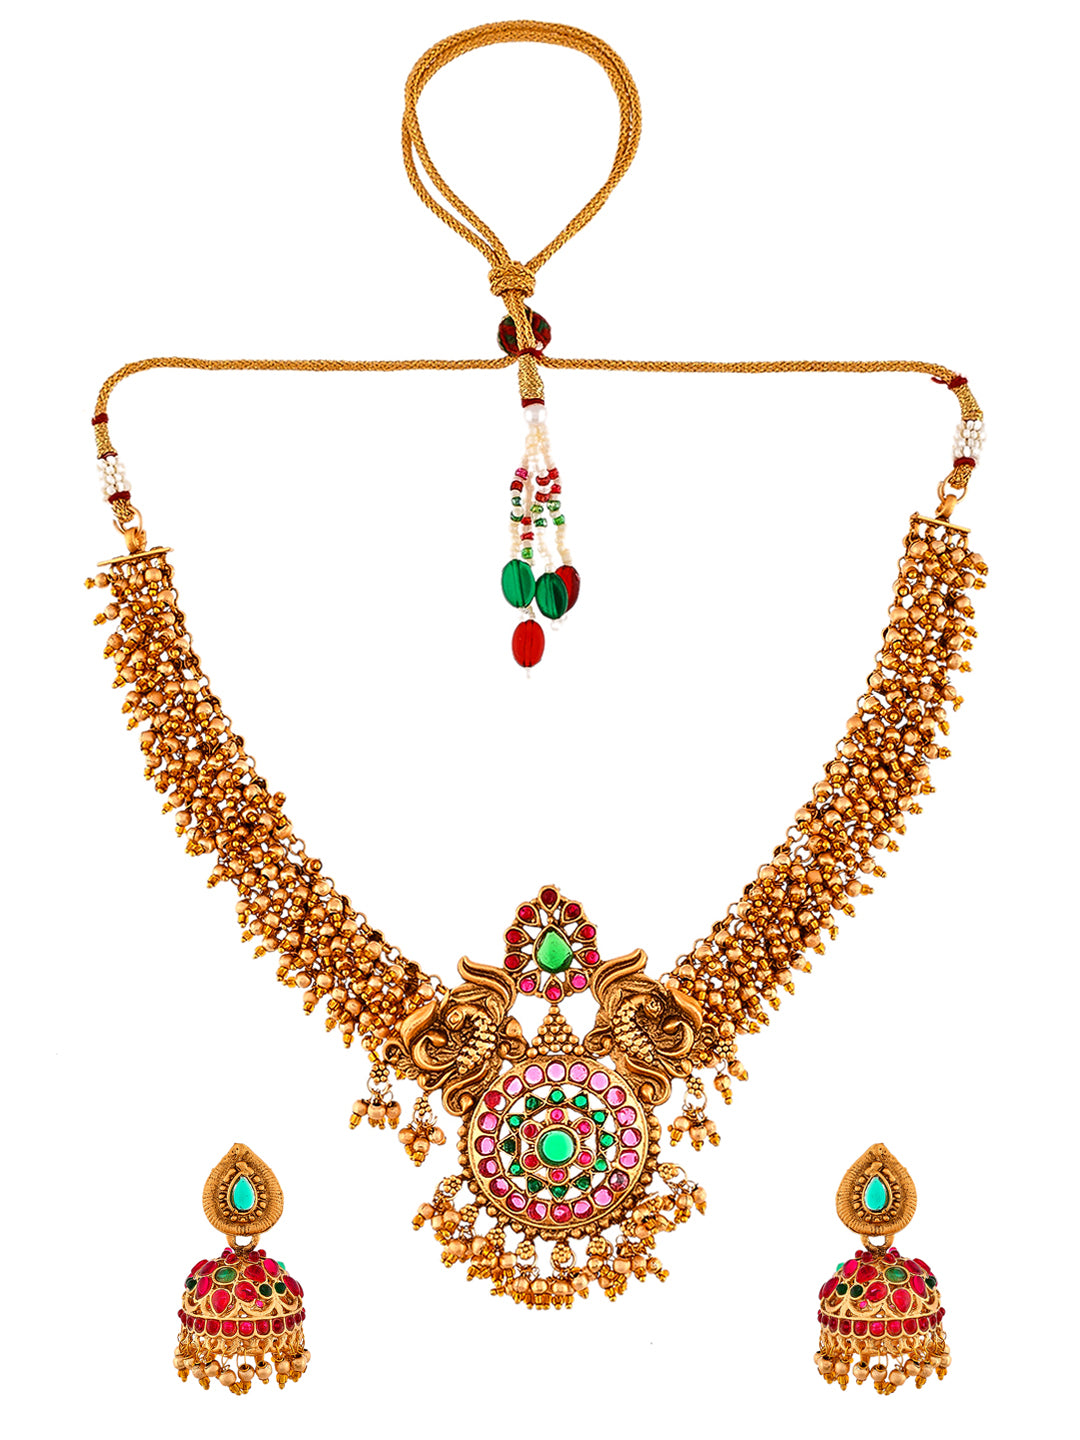 Modern Jewellery Ideas For The South Indian Bride! | WedMeGood